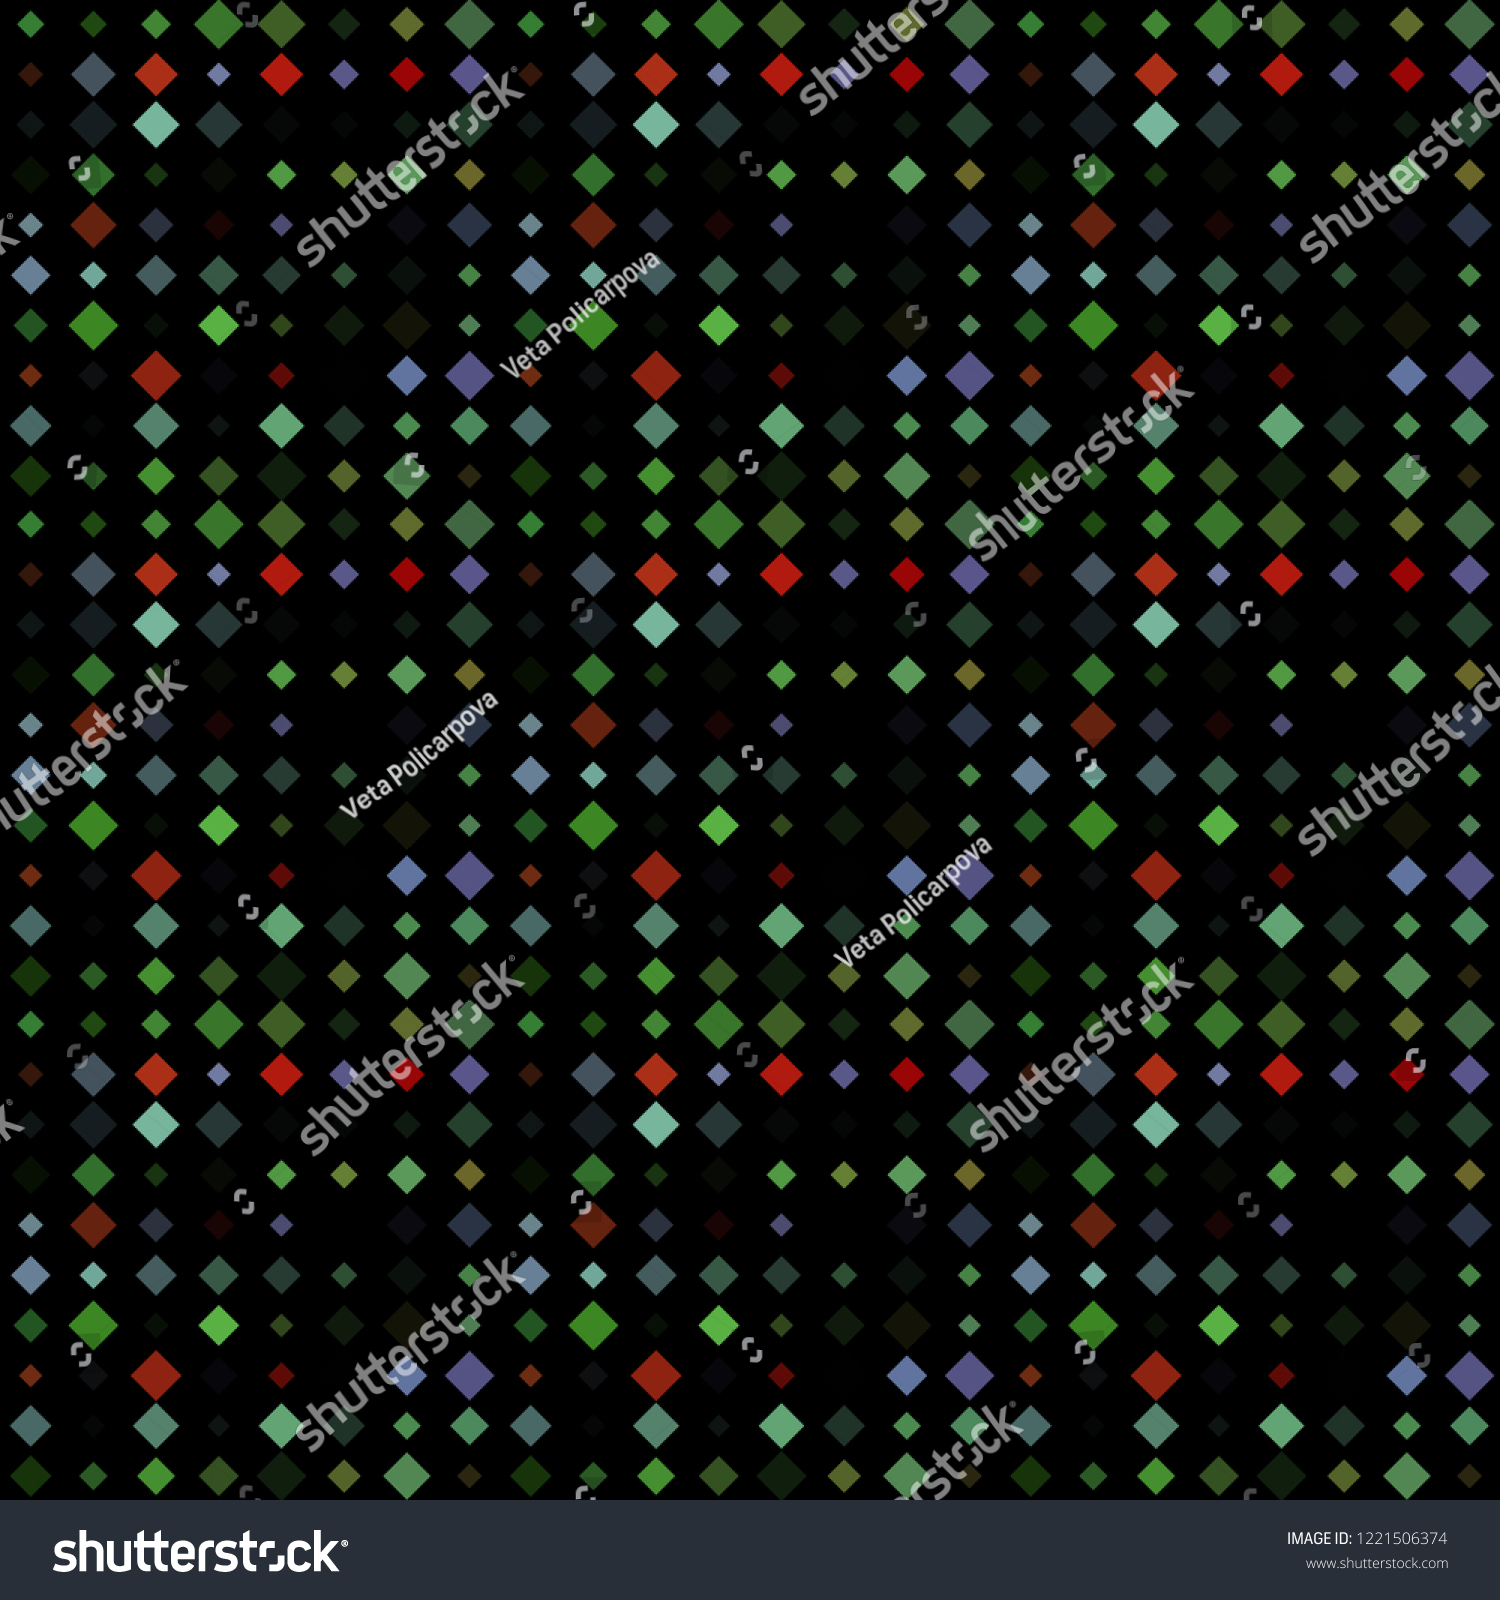 Abstract seamless pattern background with multicolored various rhombuses. #1221506374